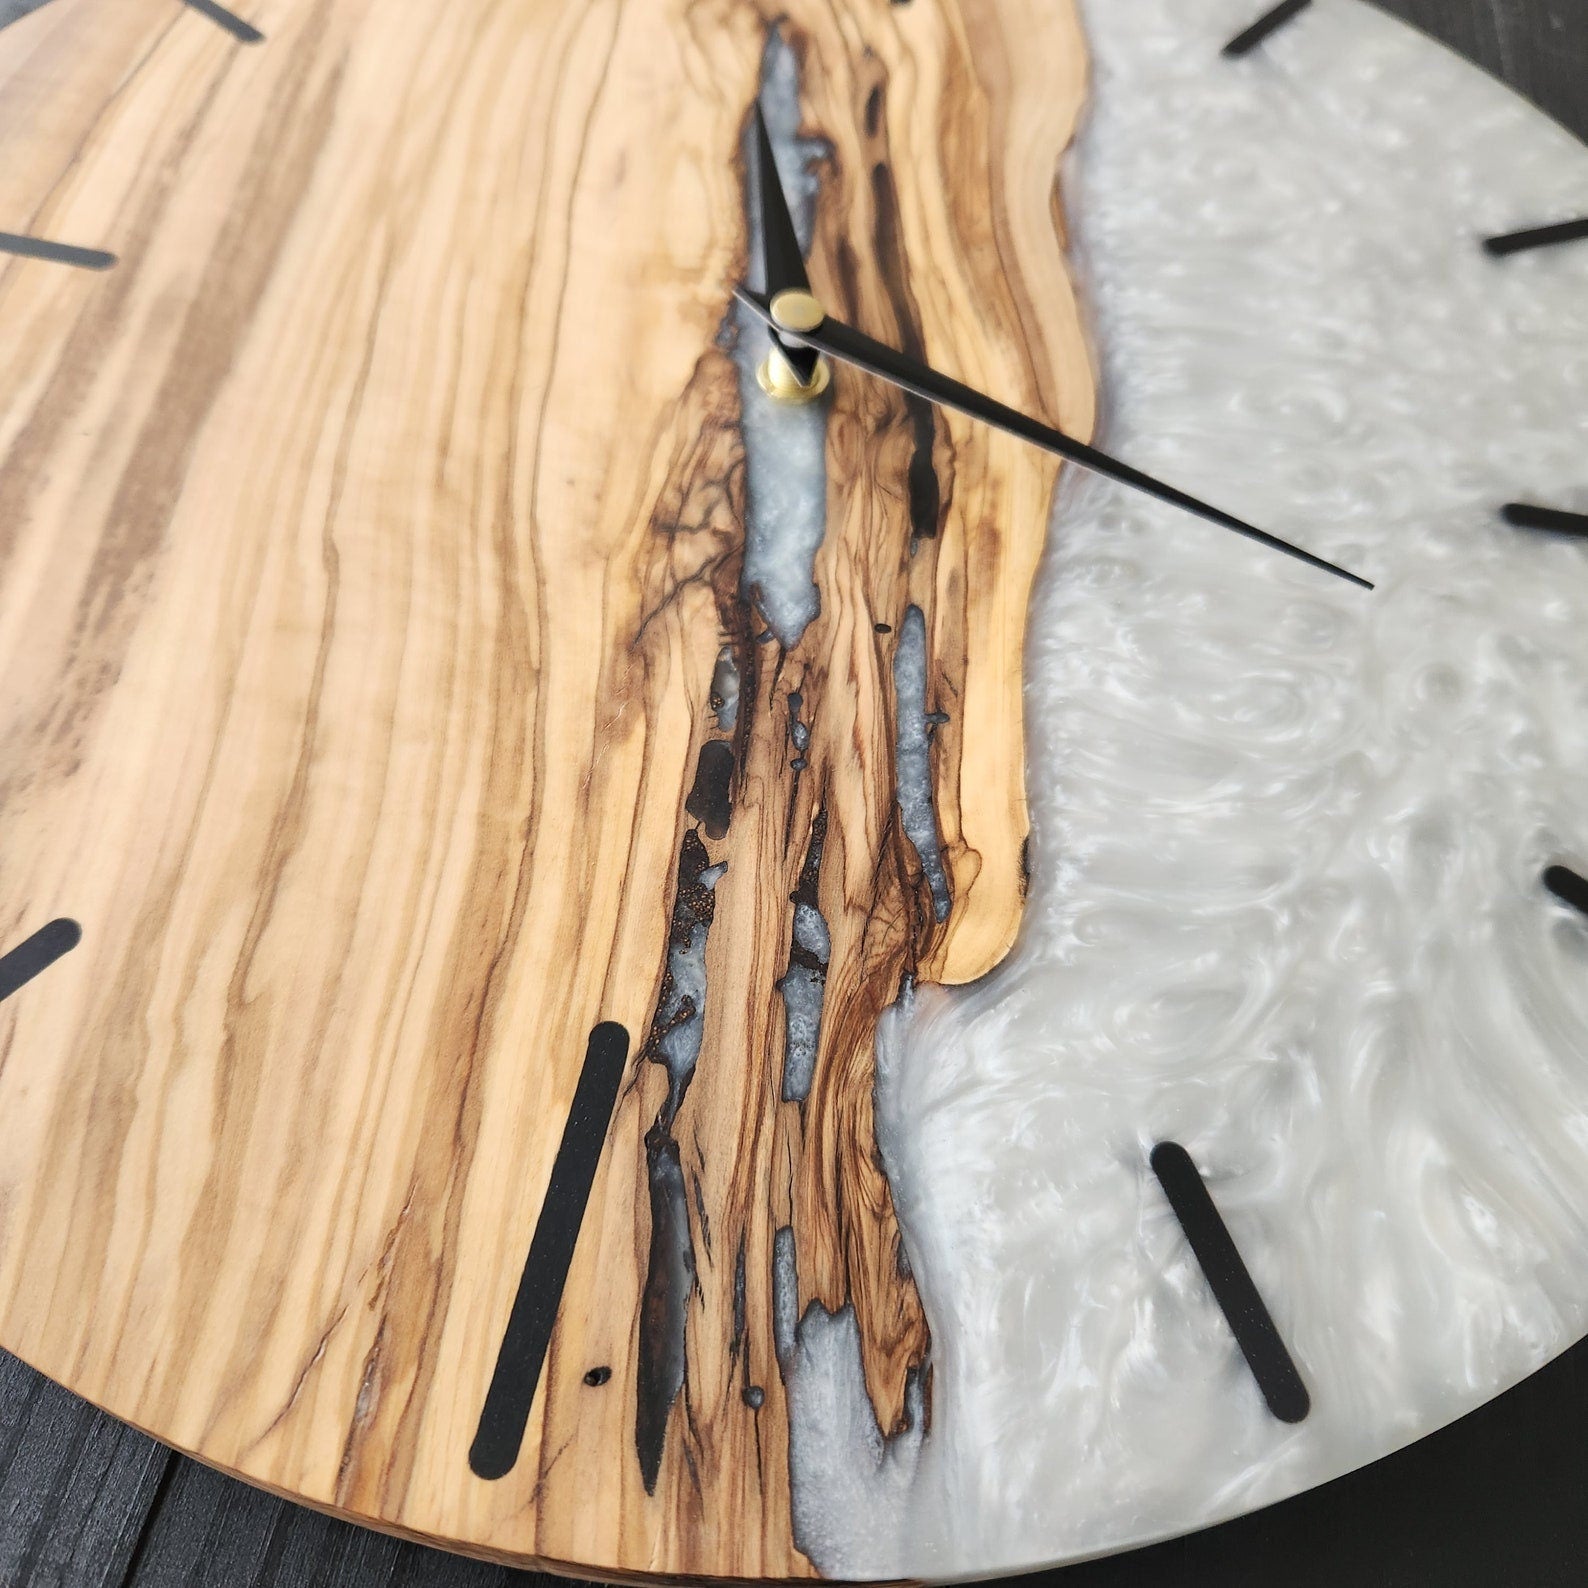 White Resin and olive wood wall clock